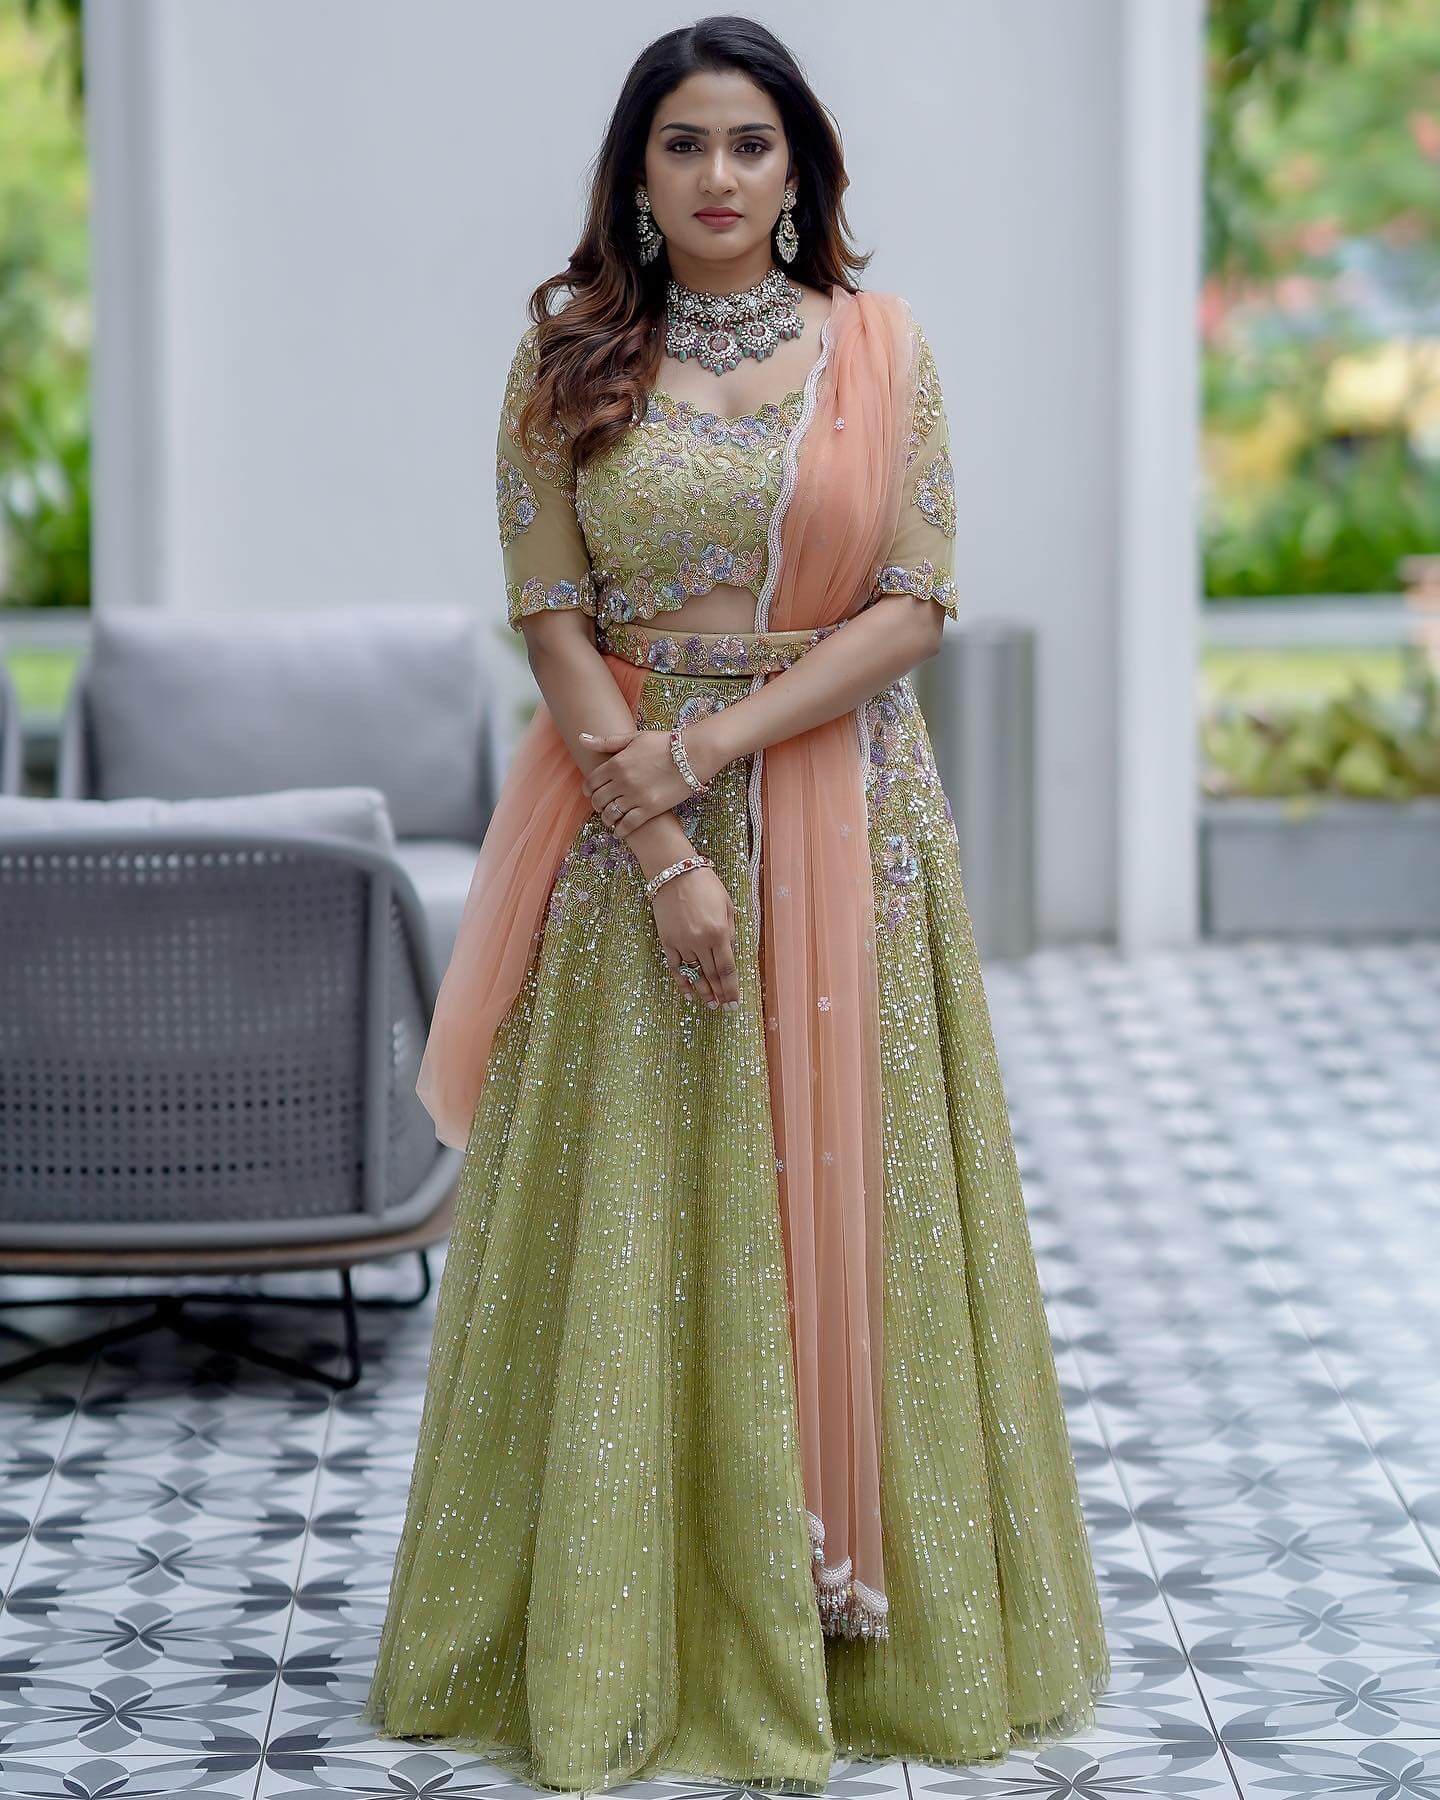 Aditi Ravi In Wild Lime Lehenga With Embellished Cutwork Blouse and Skirt Paired With Beautifully Complimenting Peach Dupatta